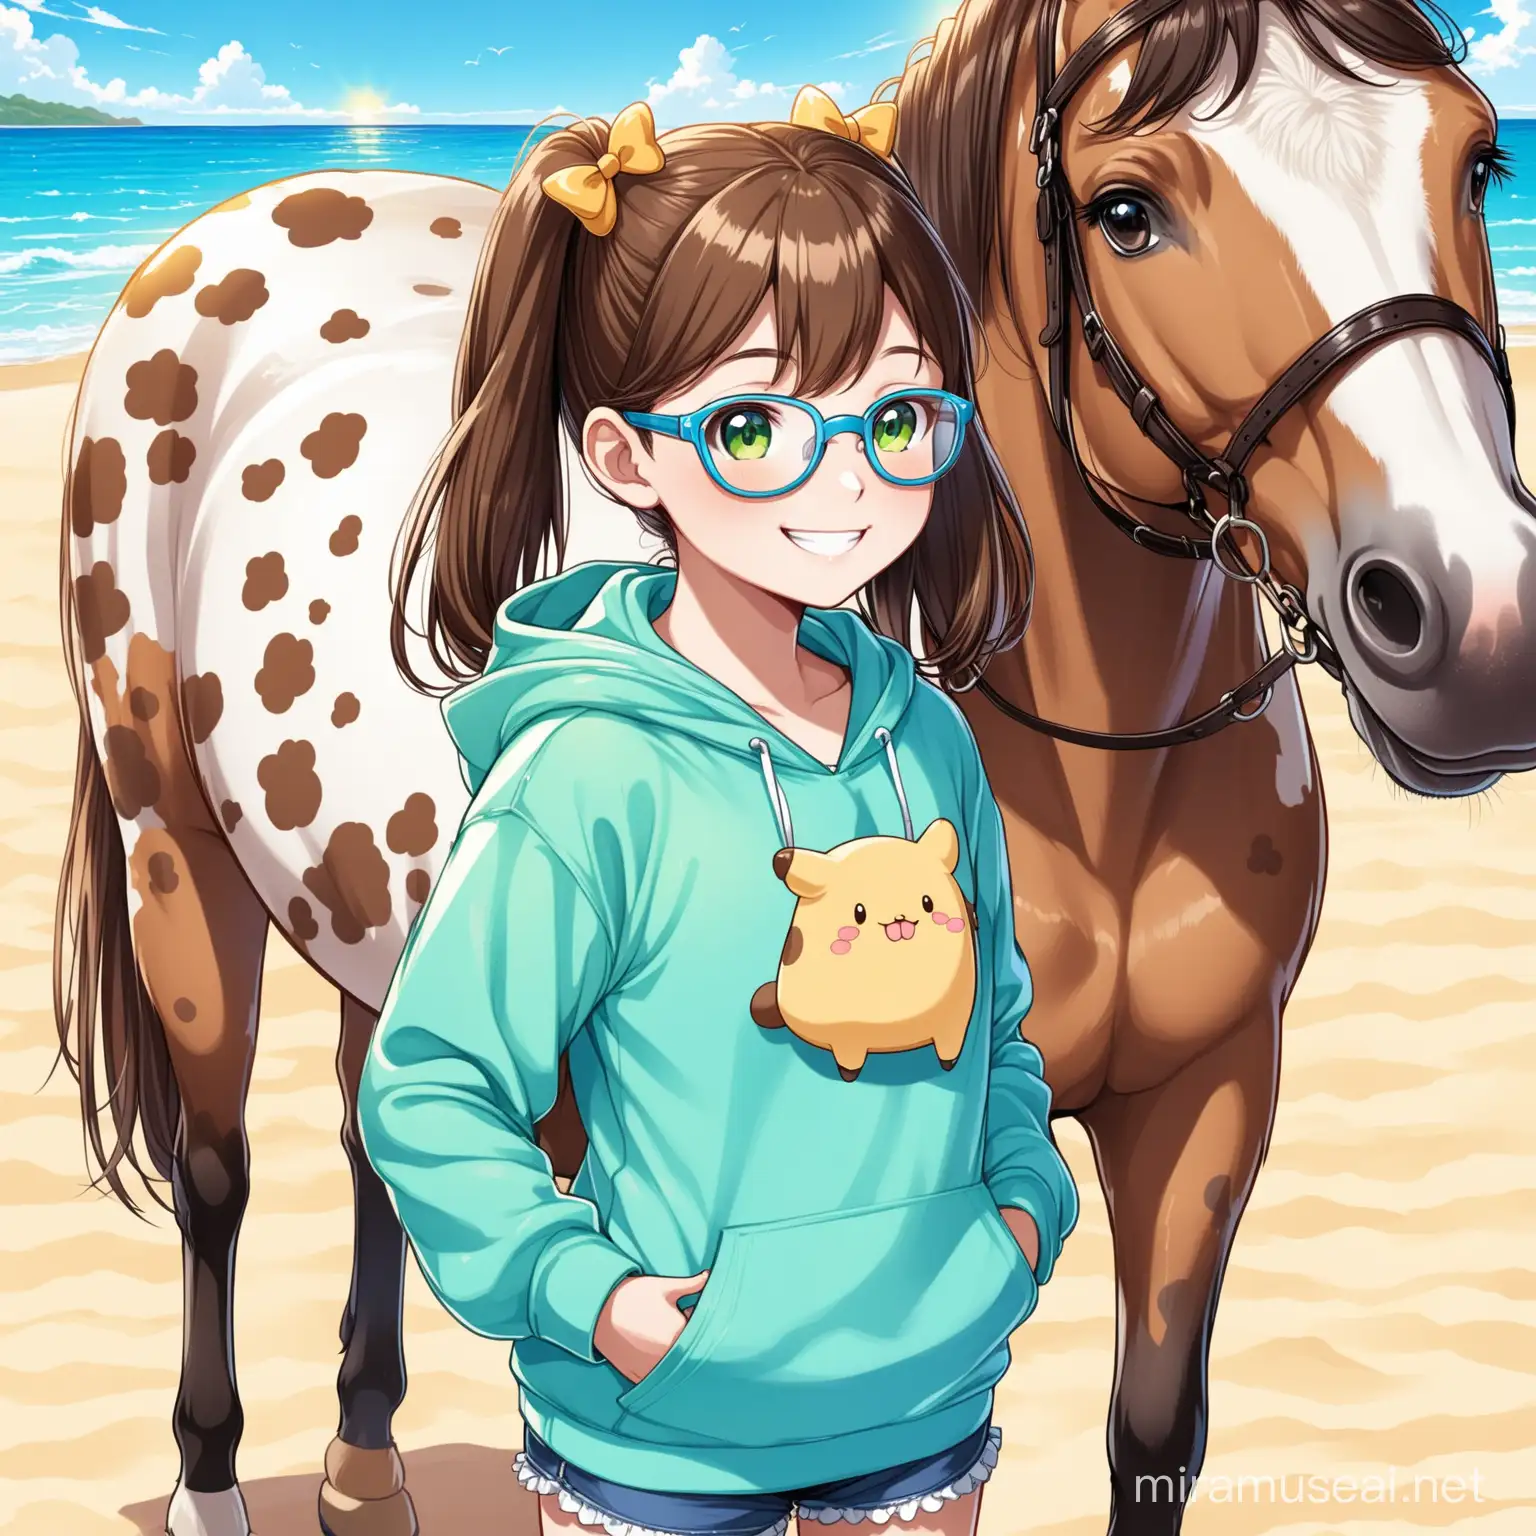 11 year old girl wearing a pompompurin hoodie, light blue glasses, long brown hair in pigtails, green eyes, smiling, standing next to an appaloosa horse, sunny beach